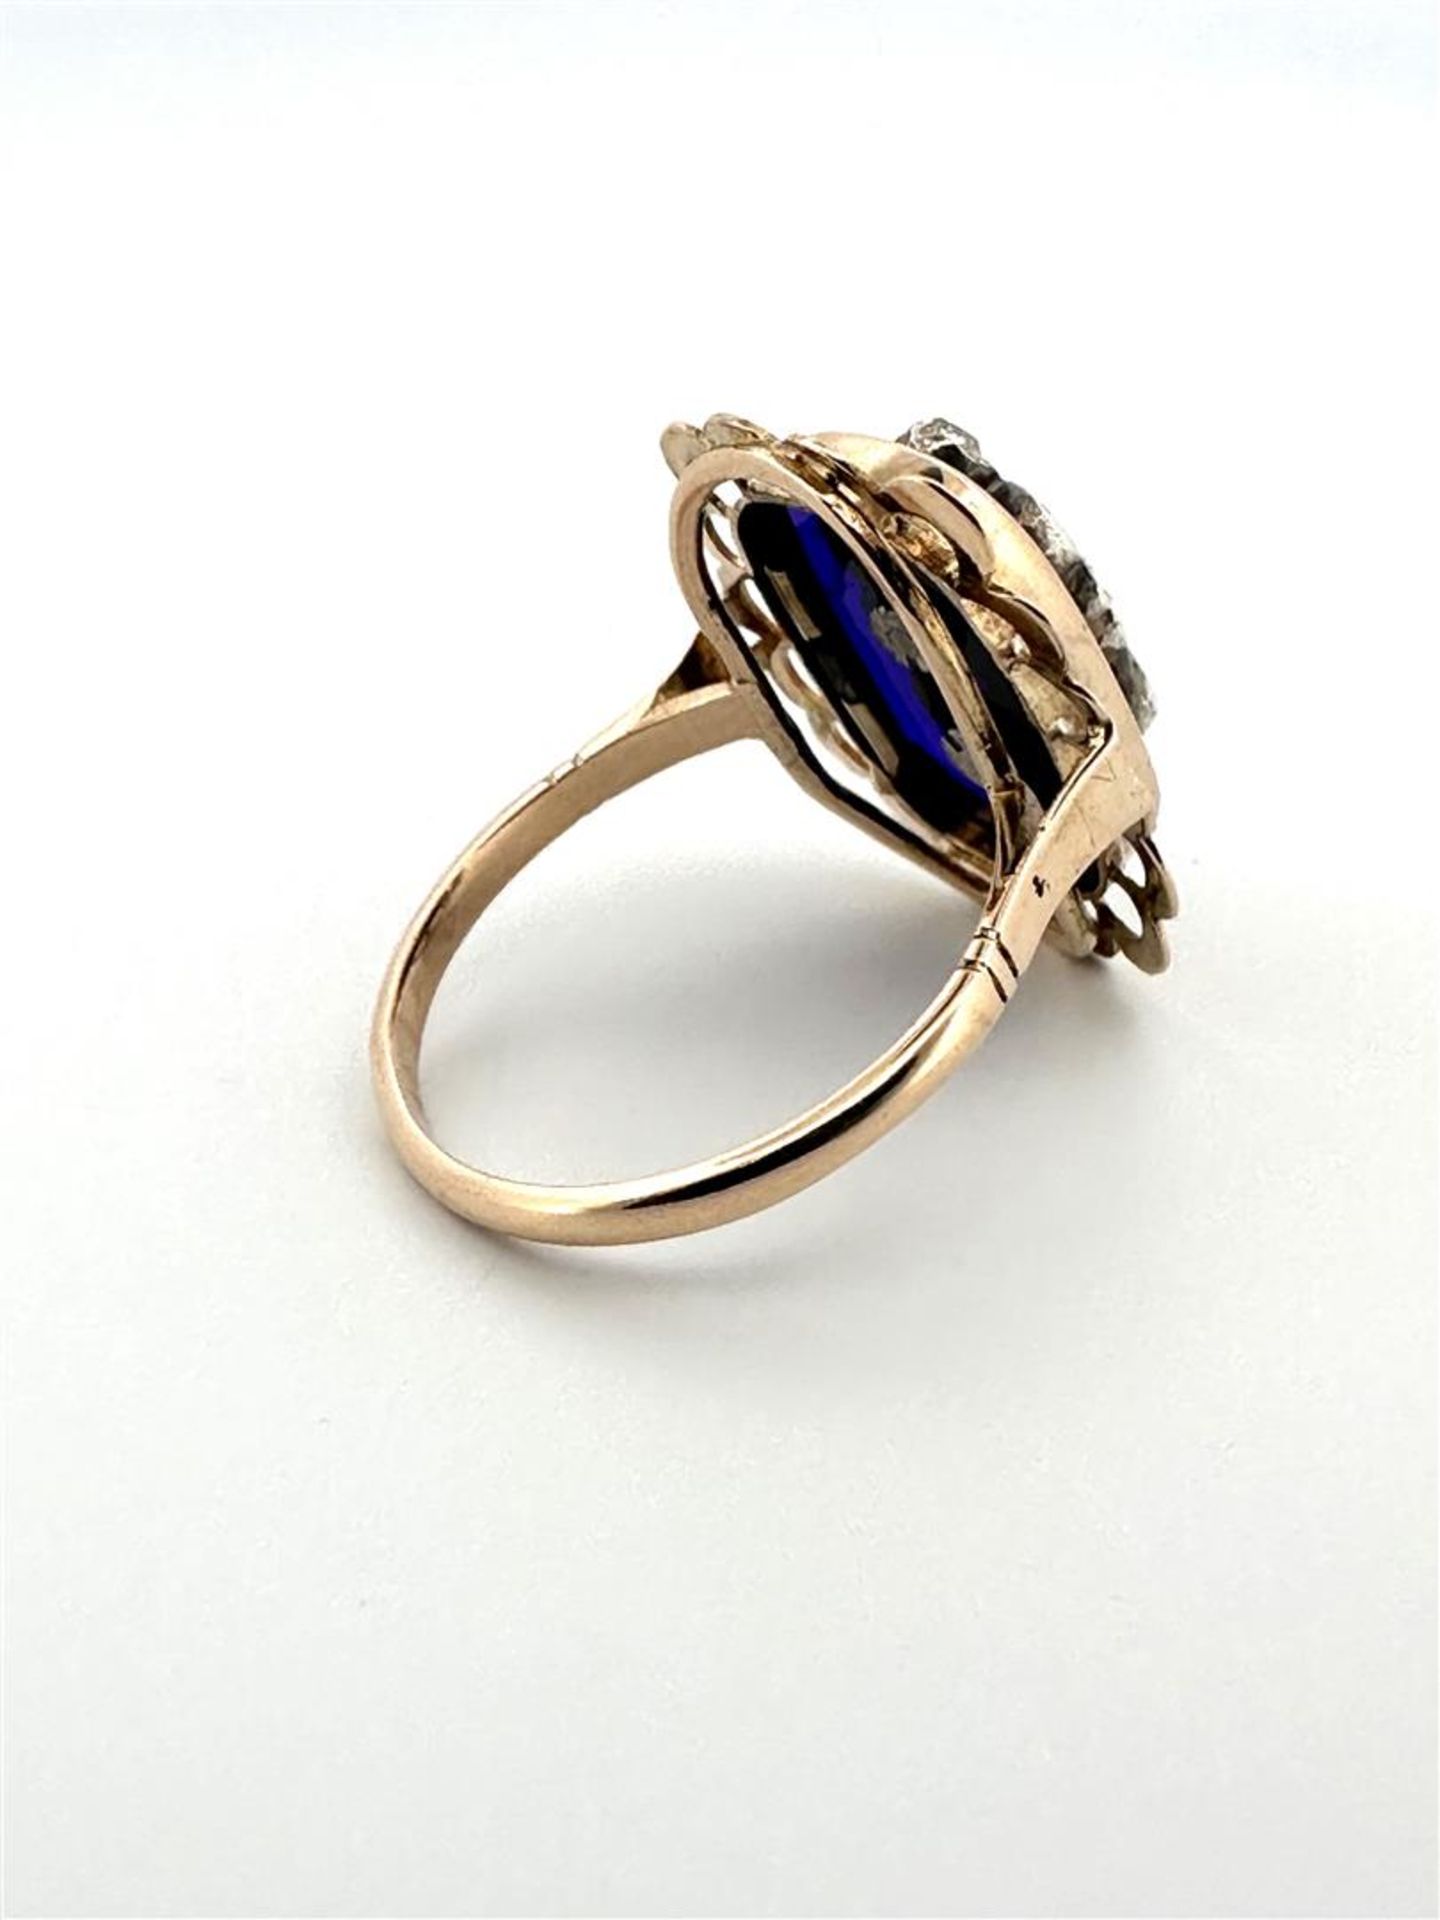 14kt bicolor gold antique appliqué ring with openwork scalloped edge, blue glass and rough diamond.
 - Image 5 of 5